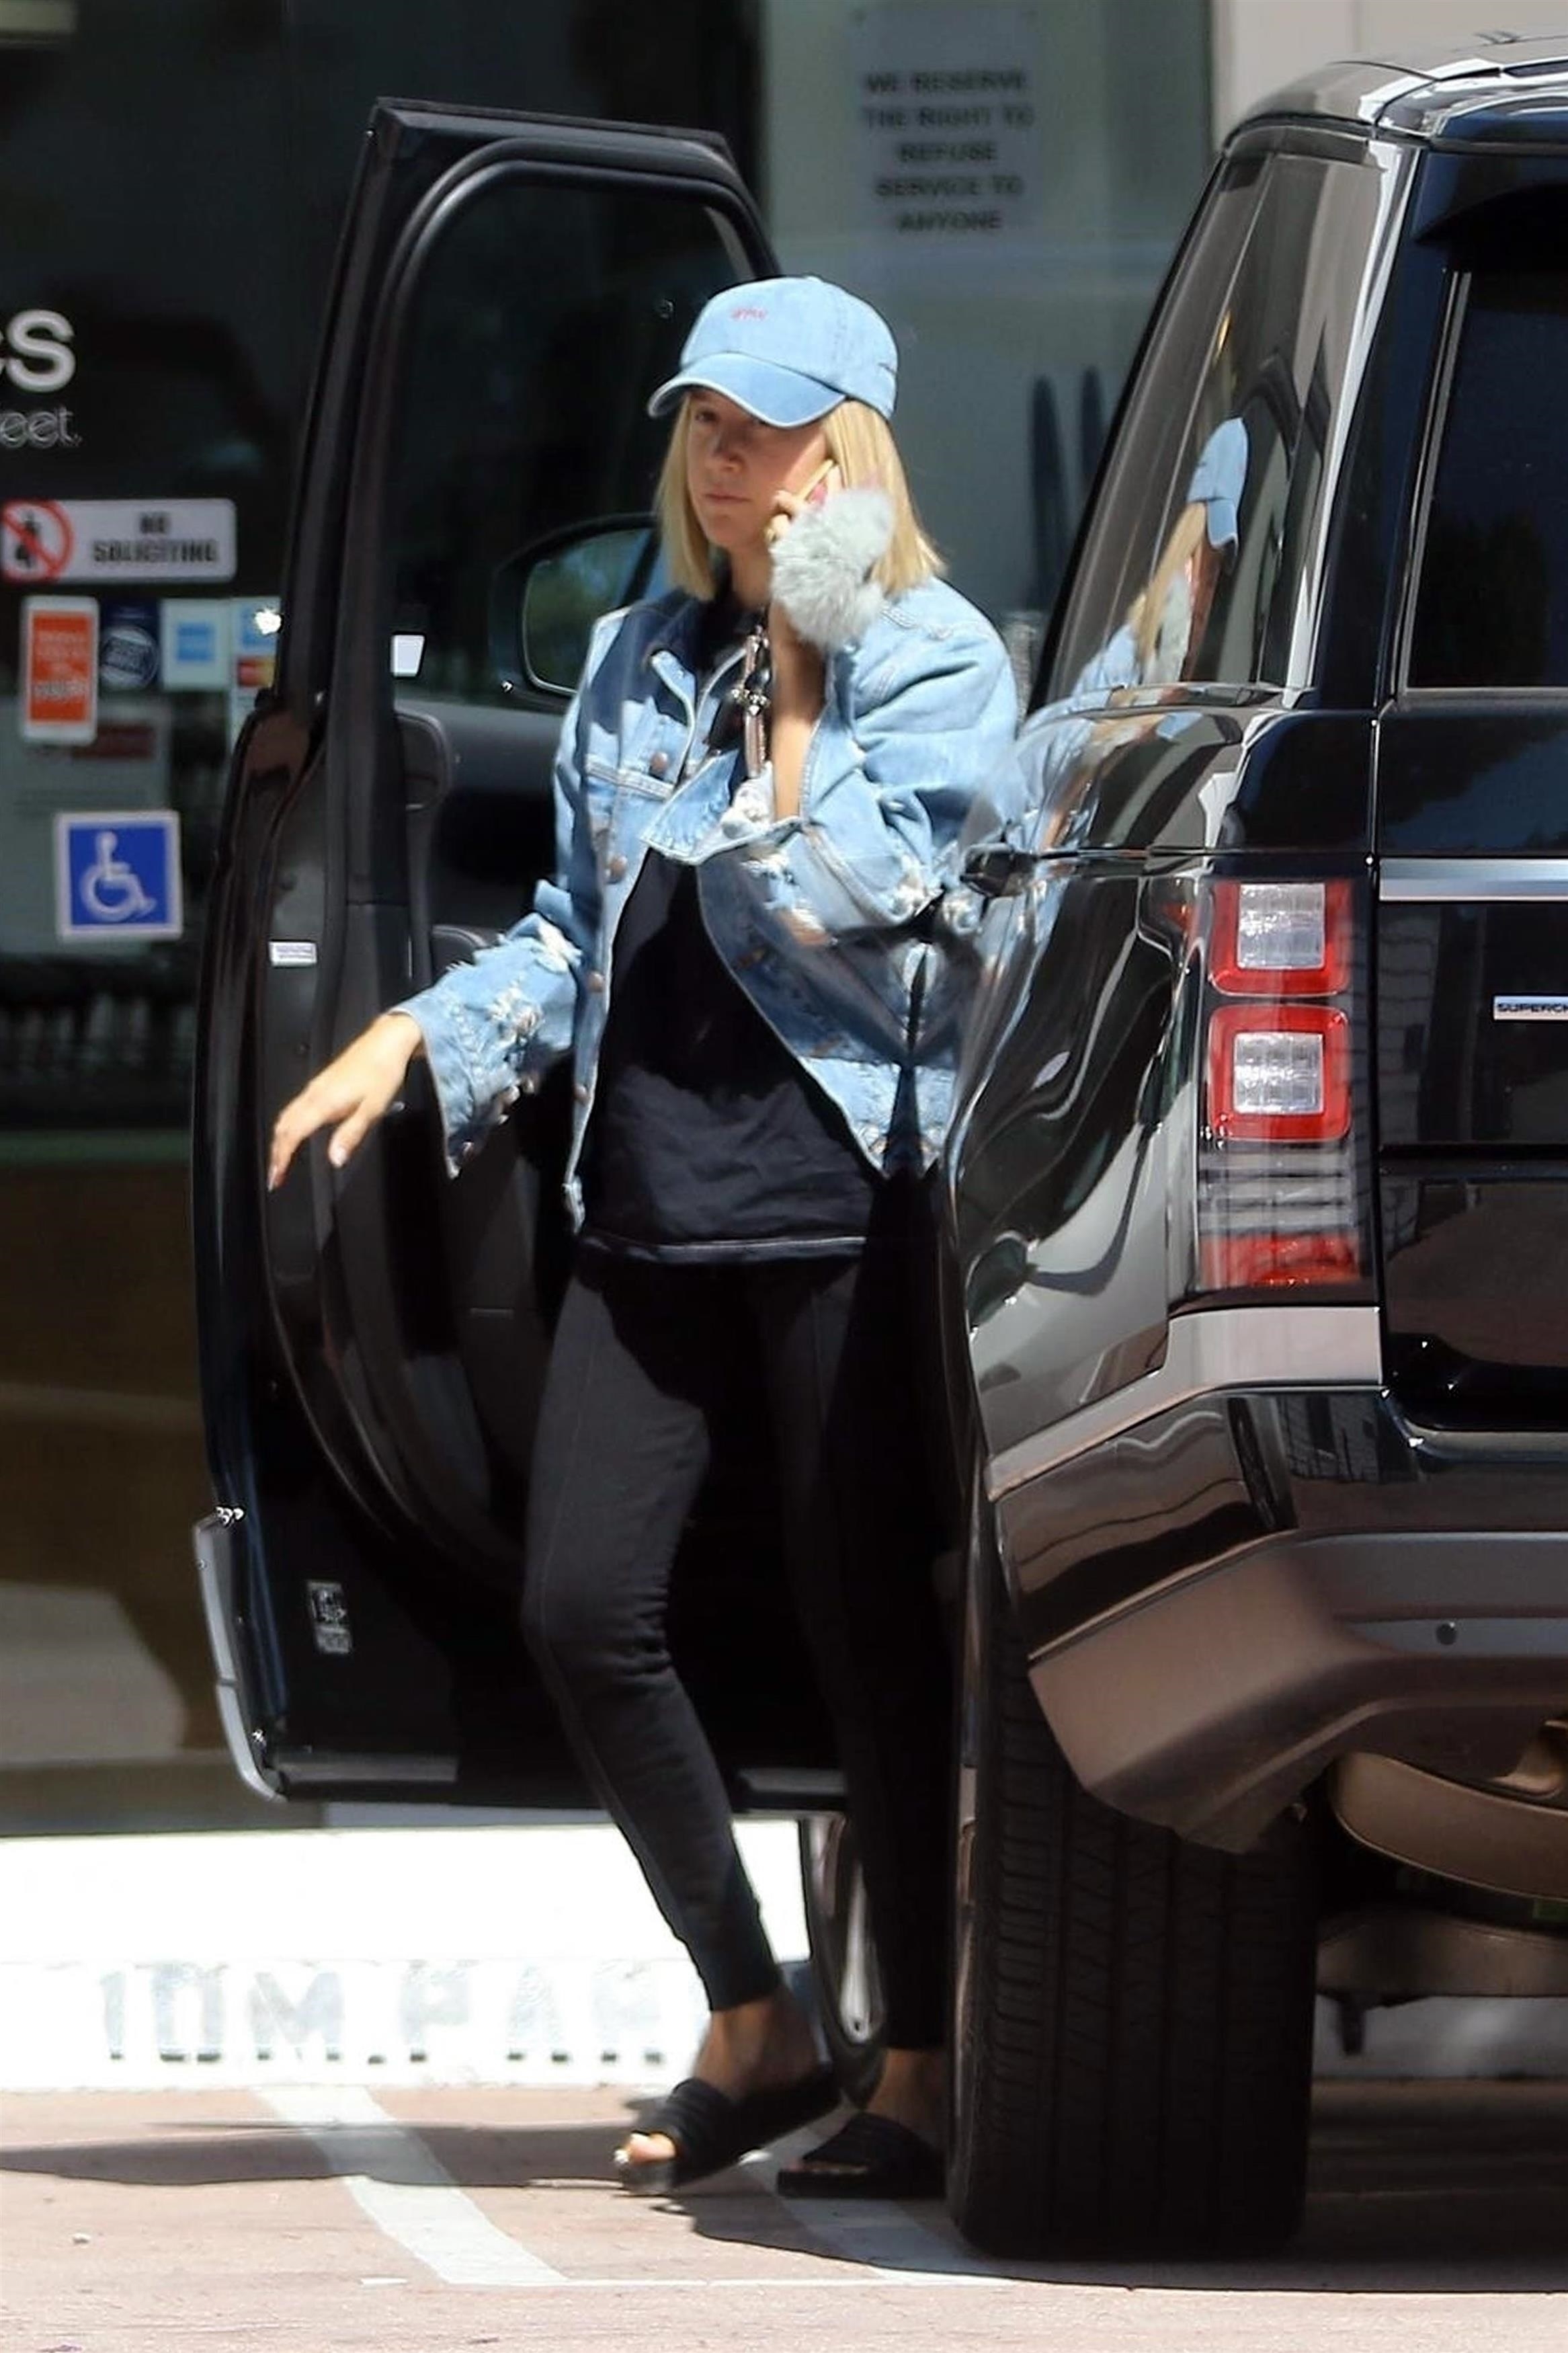 ashley-tisdale-going-to-a-nail-salon-in-studio-city-92218-5.jpg